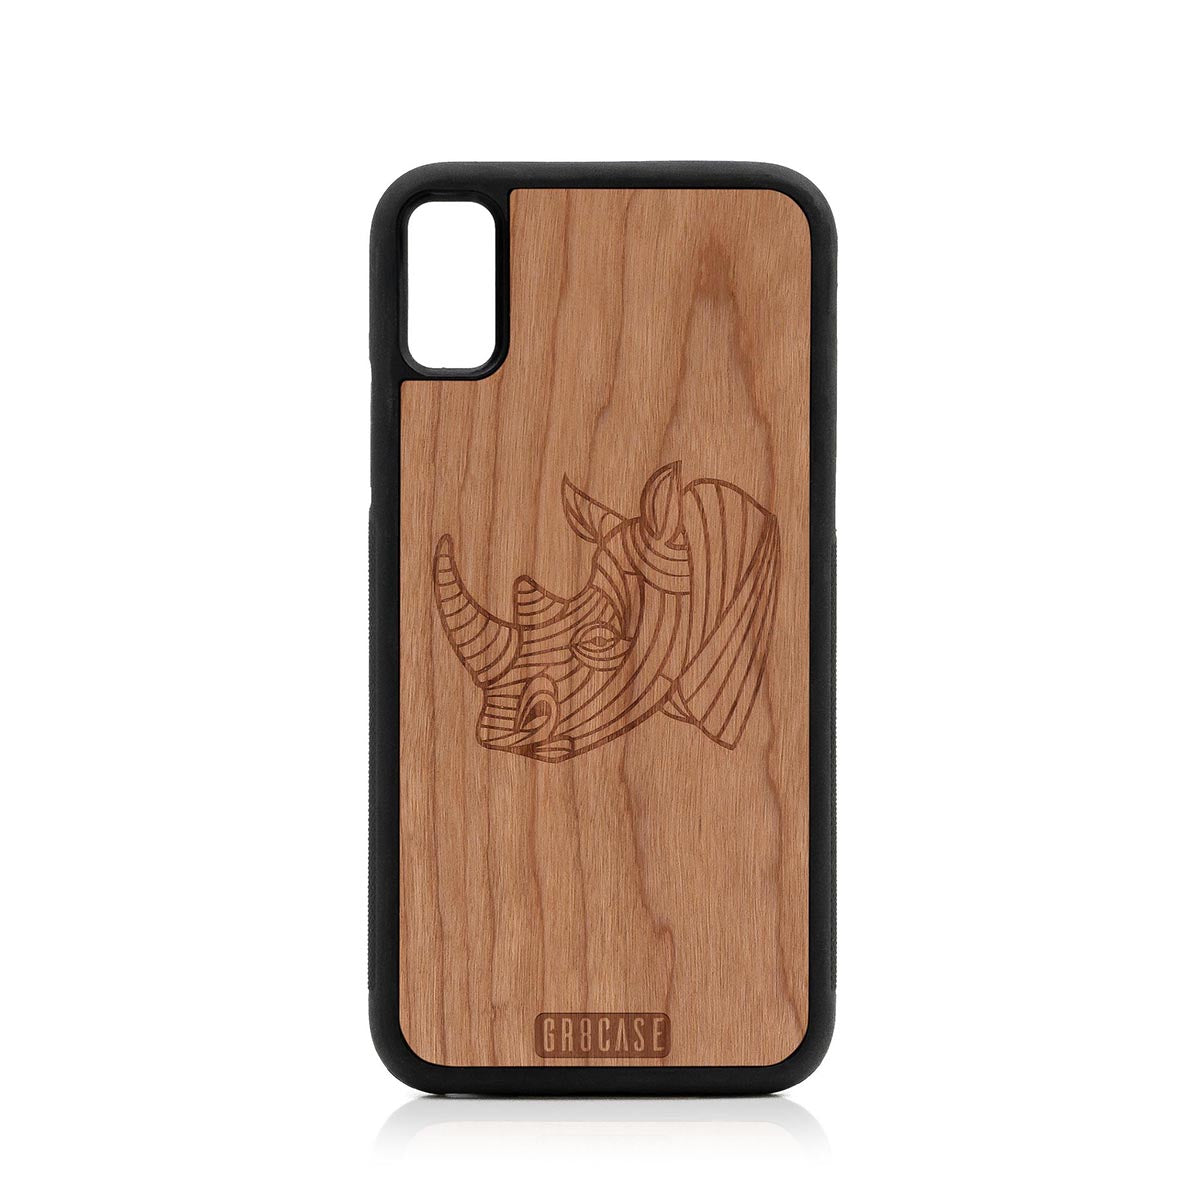 Rhino Design Wood Case For iPhone XR by GR8CASE